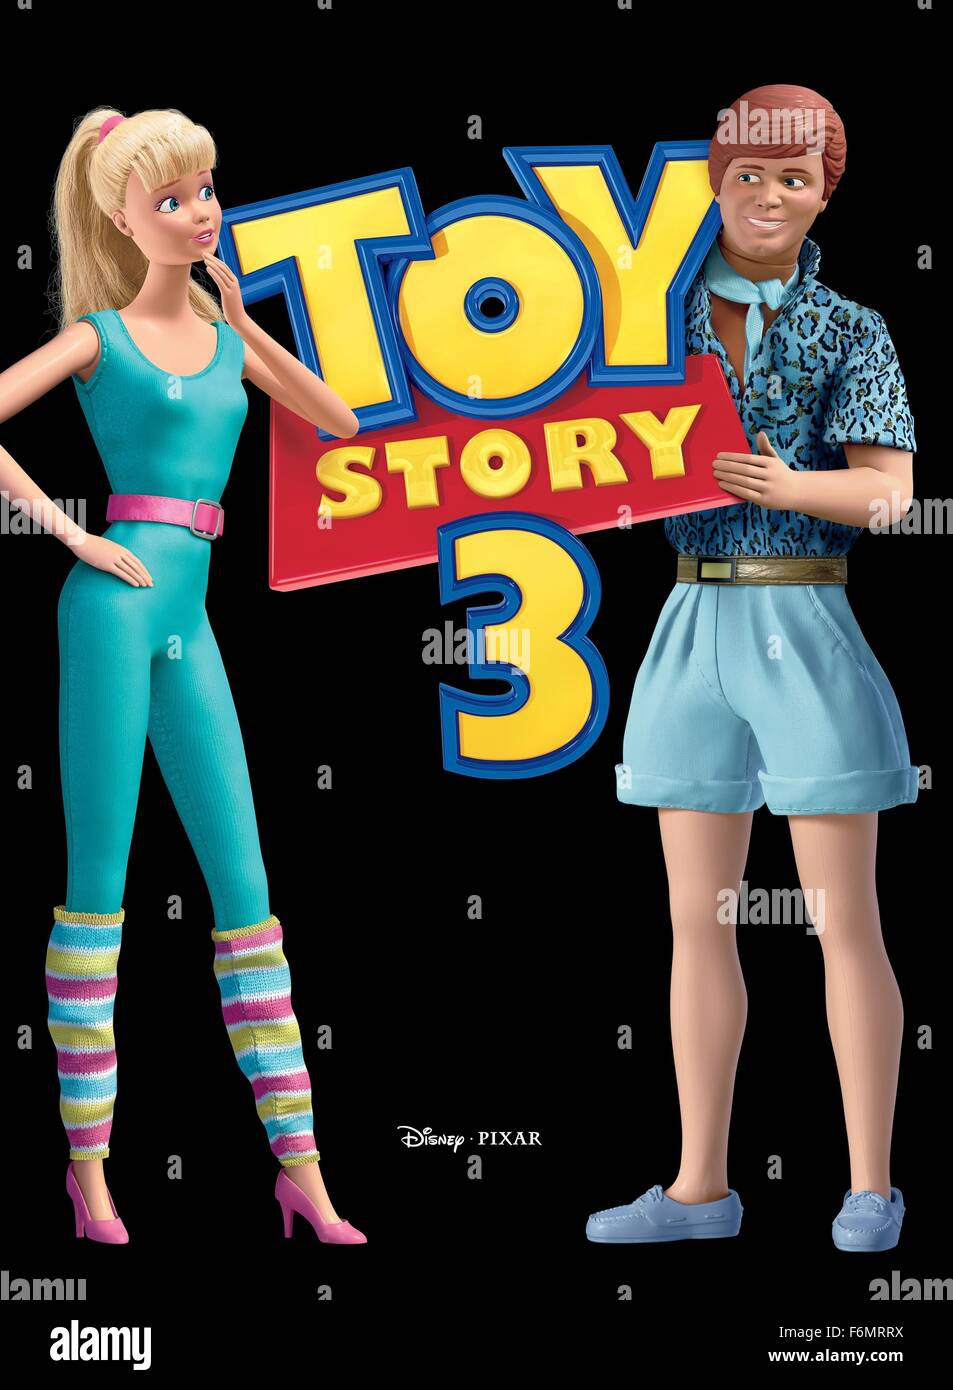 RELEASE DATE: June 18, 2010 MOVIE TITLE: Toy Story 3 STUDIO: Disney Pixar  DIRECTOR: Lee Unkrich PLOT: Woody, Buzz, and the rest of their toy-box  friends are dumped in a day-care center